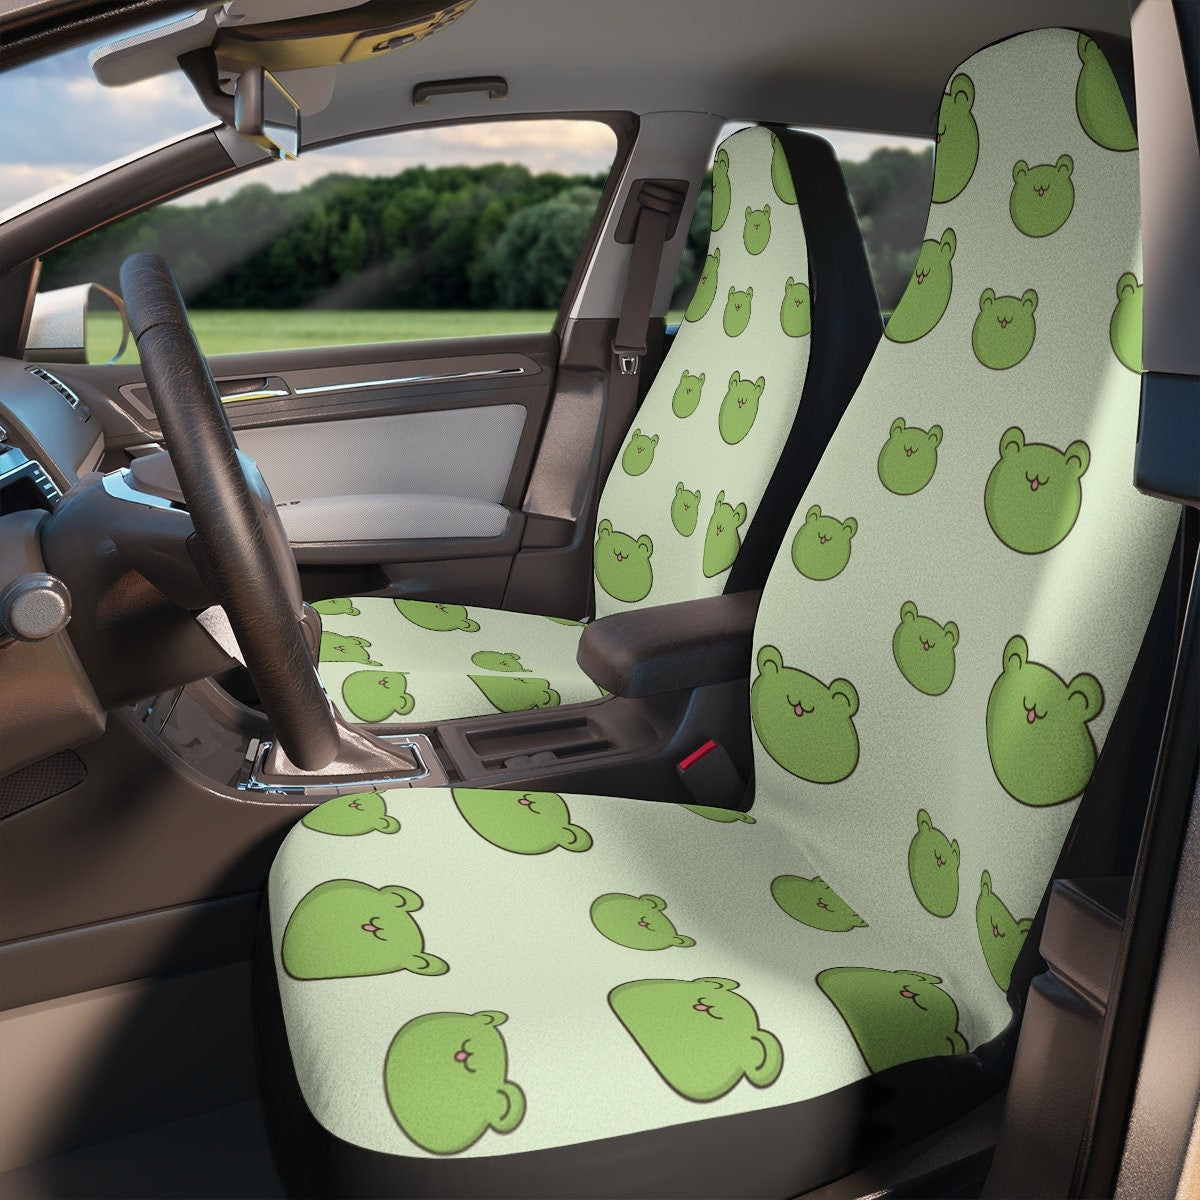 Car Seat Covers, Frogs Cute Car Accessories for Women, Hippie Toad Car Decor, Universal Car Chair Cover, Boho Cottagecore Vehicle Seat Cover HMDesignStudioUS